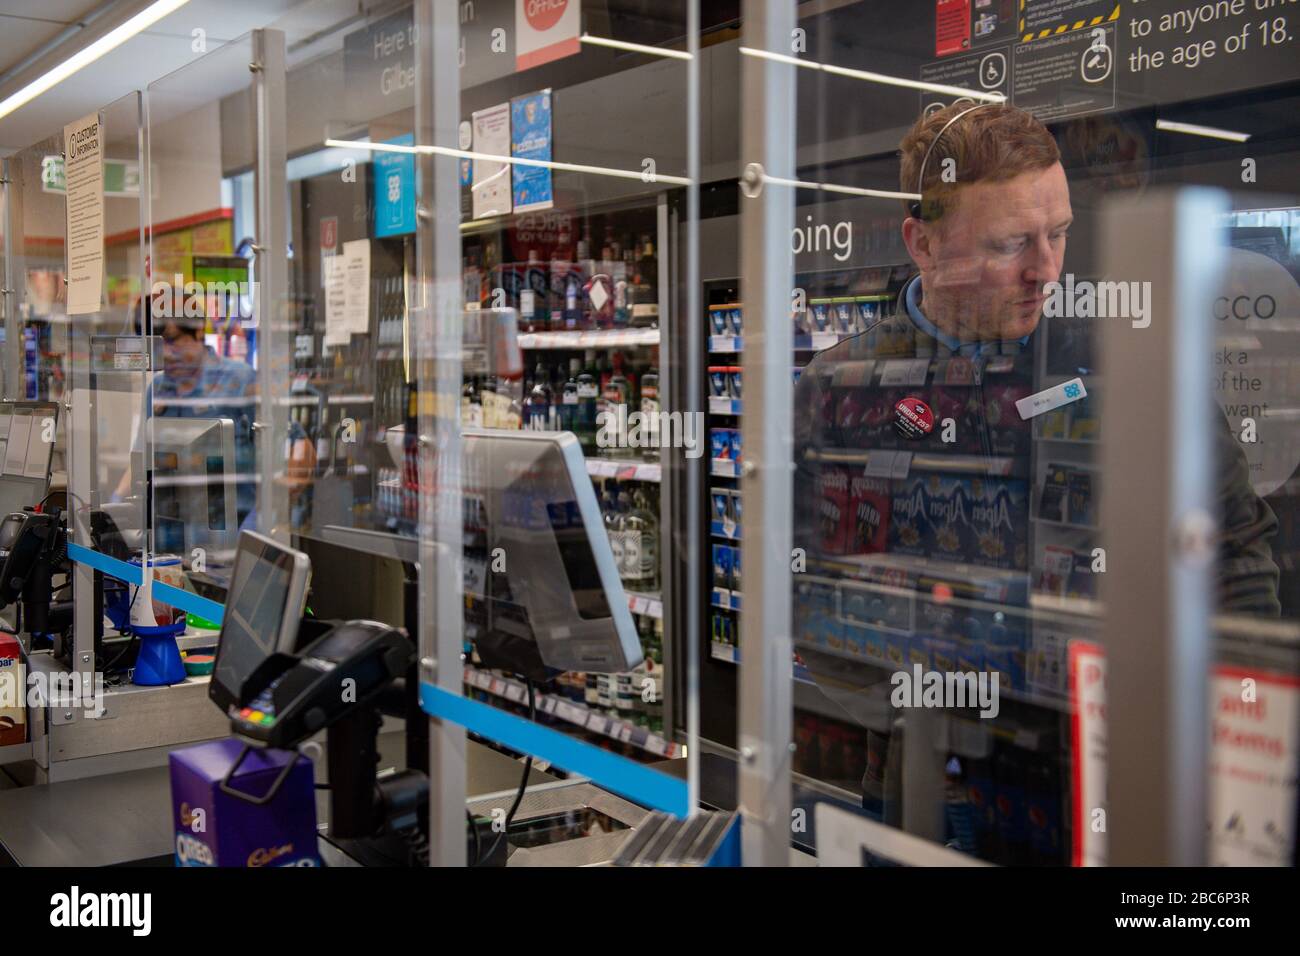 A clear screen divides employees and customers in store at a Co-op shop in Bromsgrove, Worcestershire. Stock Photo